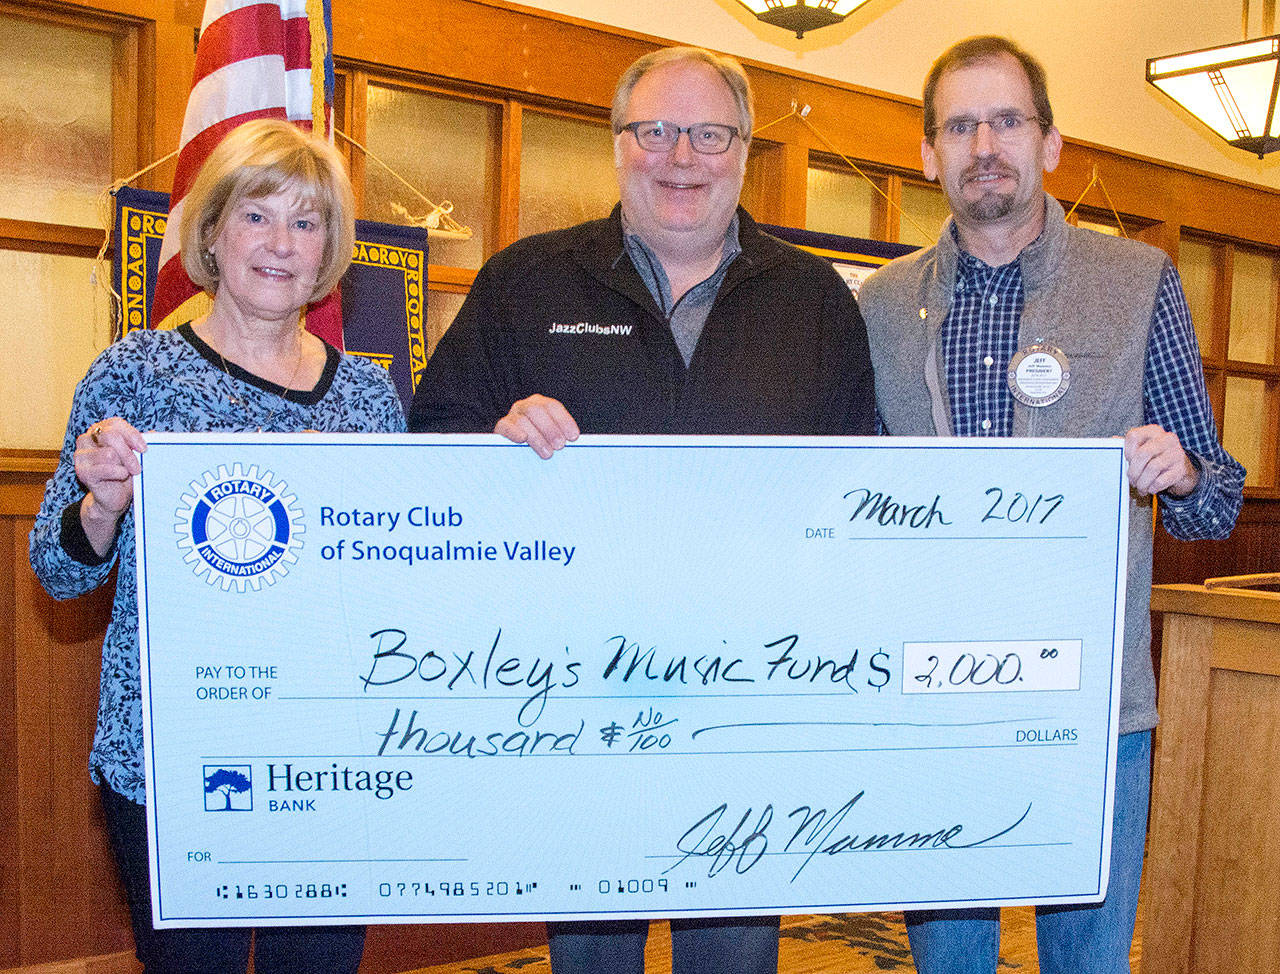 Boxley Music Fund, also known as Jazz Clubs NW, was one of the community organizations to be awarded a 2017 Rotary Grant. Rotary members Nancy Whitaker, left, and President Jeff Mumma, right, presented the award to Jazz Clubs NW Executive Director Gregory Malcom March 23.                                Courtesy Photo